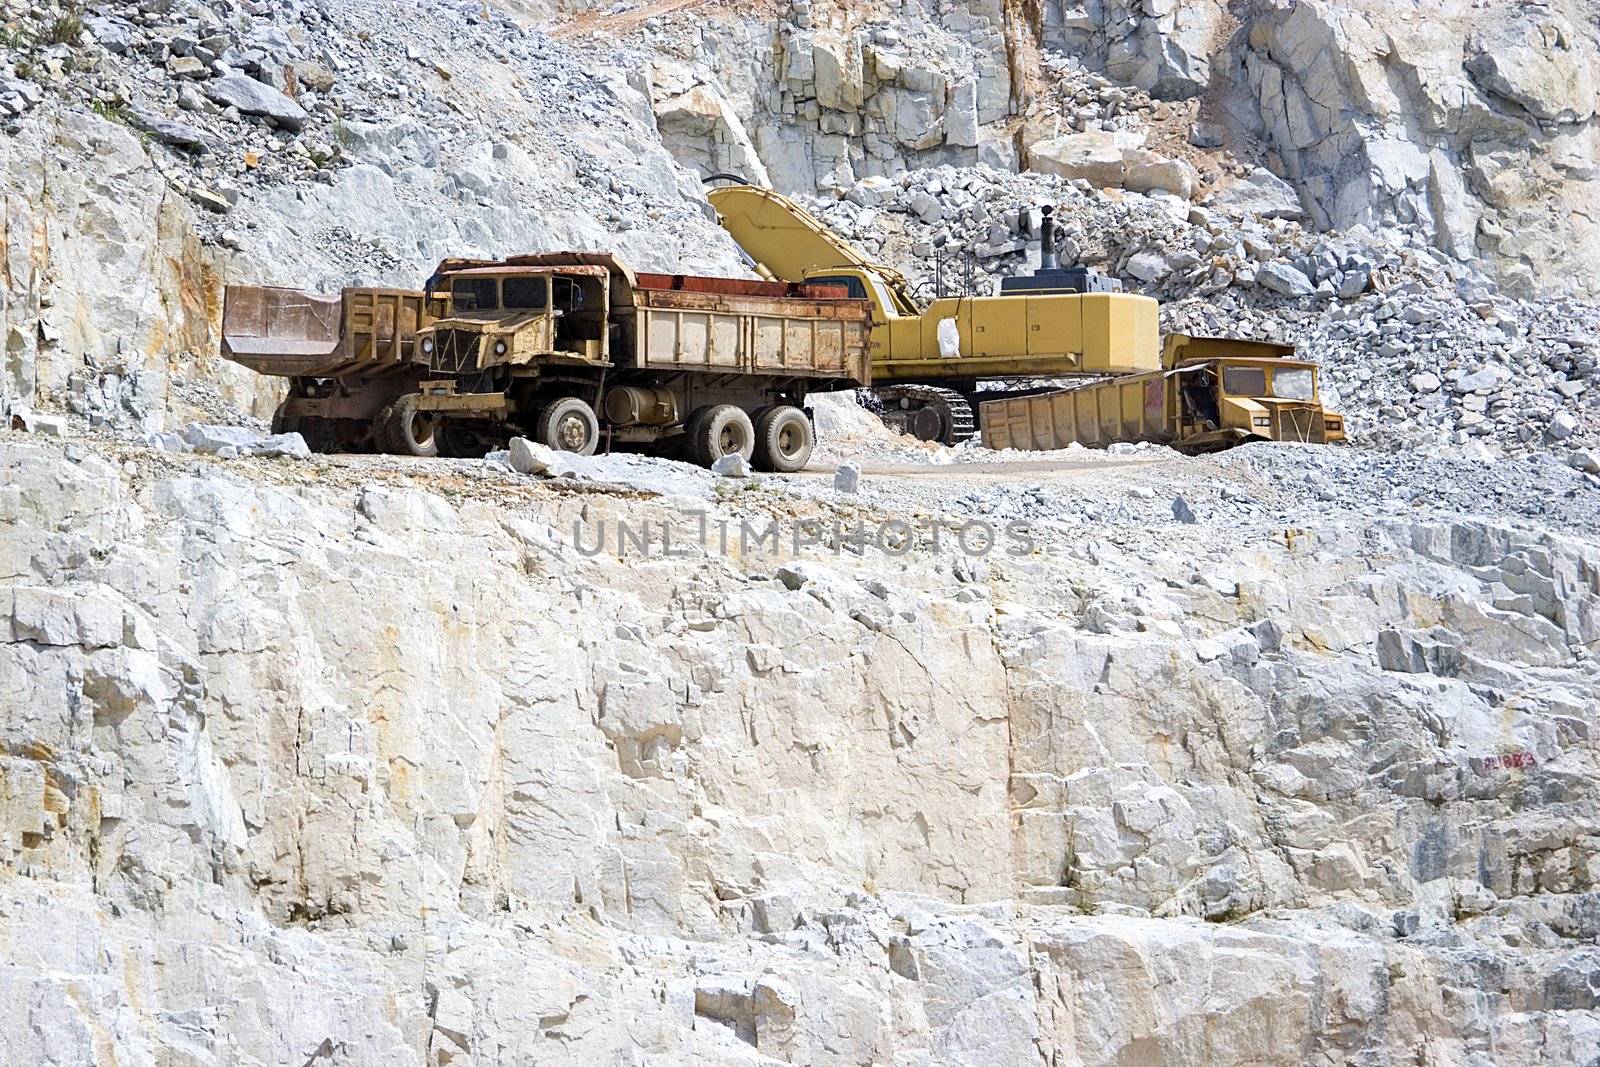 Image of rock quarry works in Malaysia.